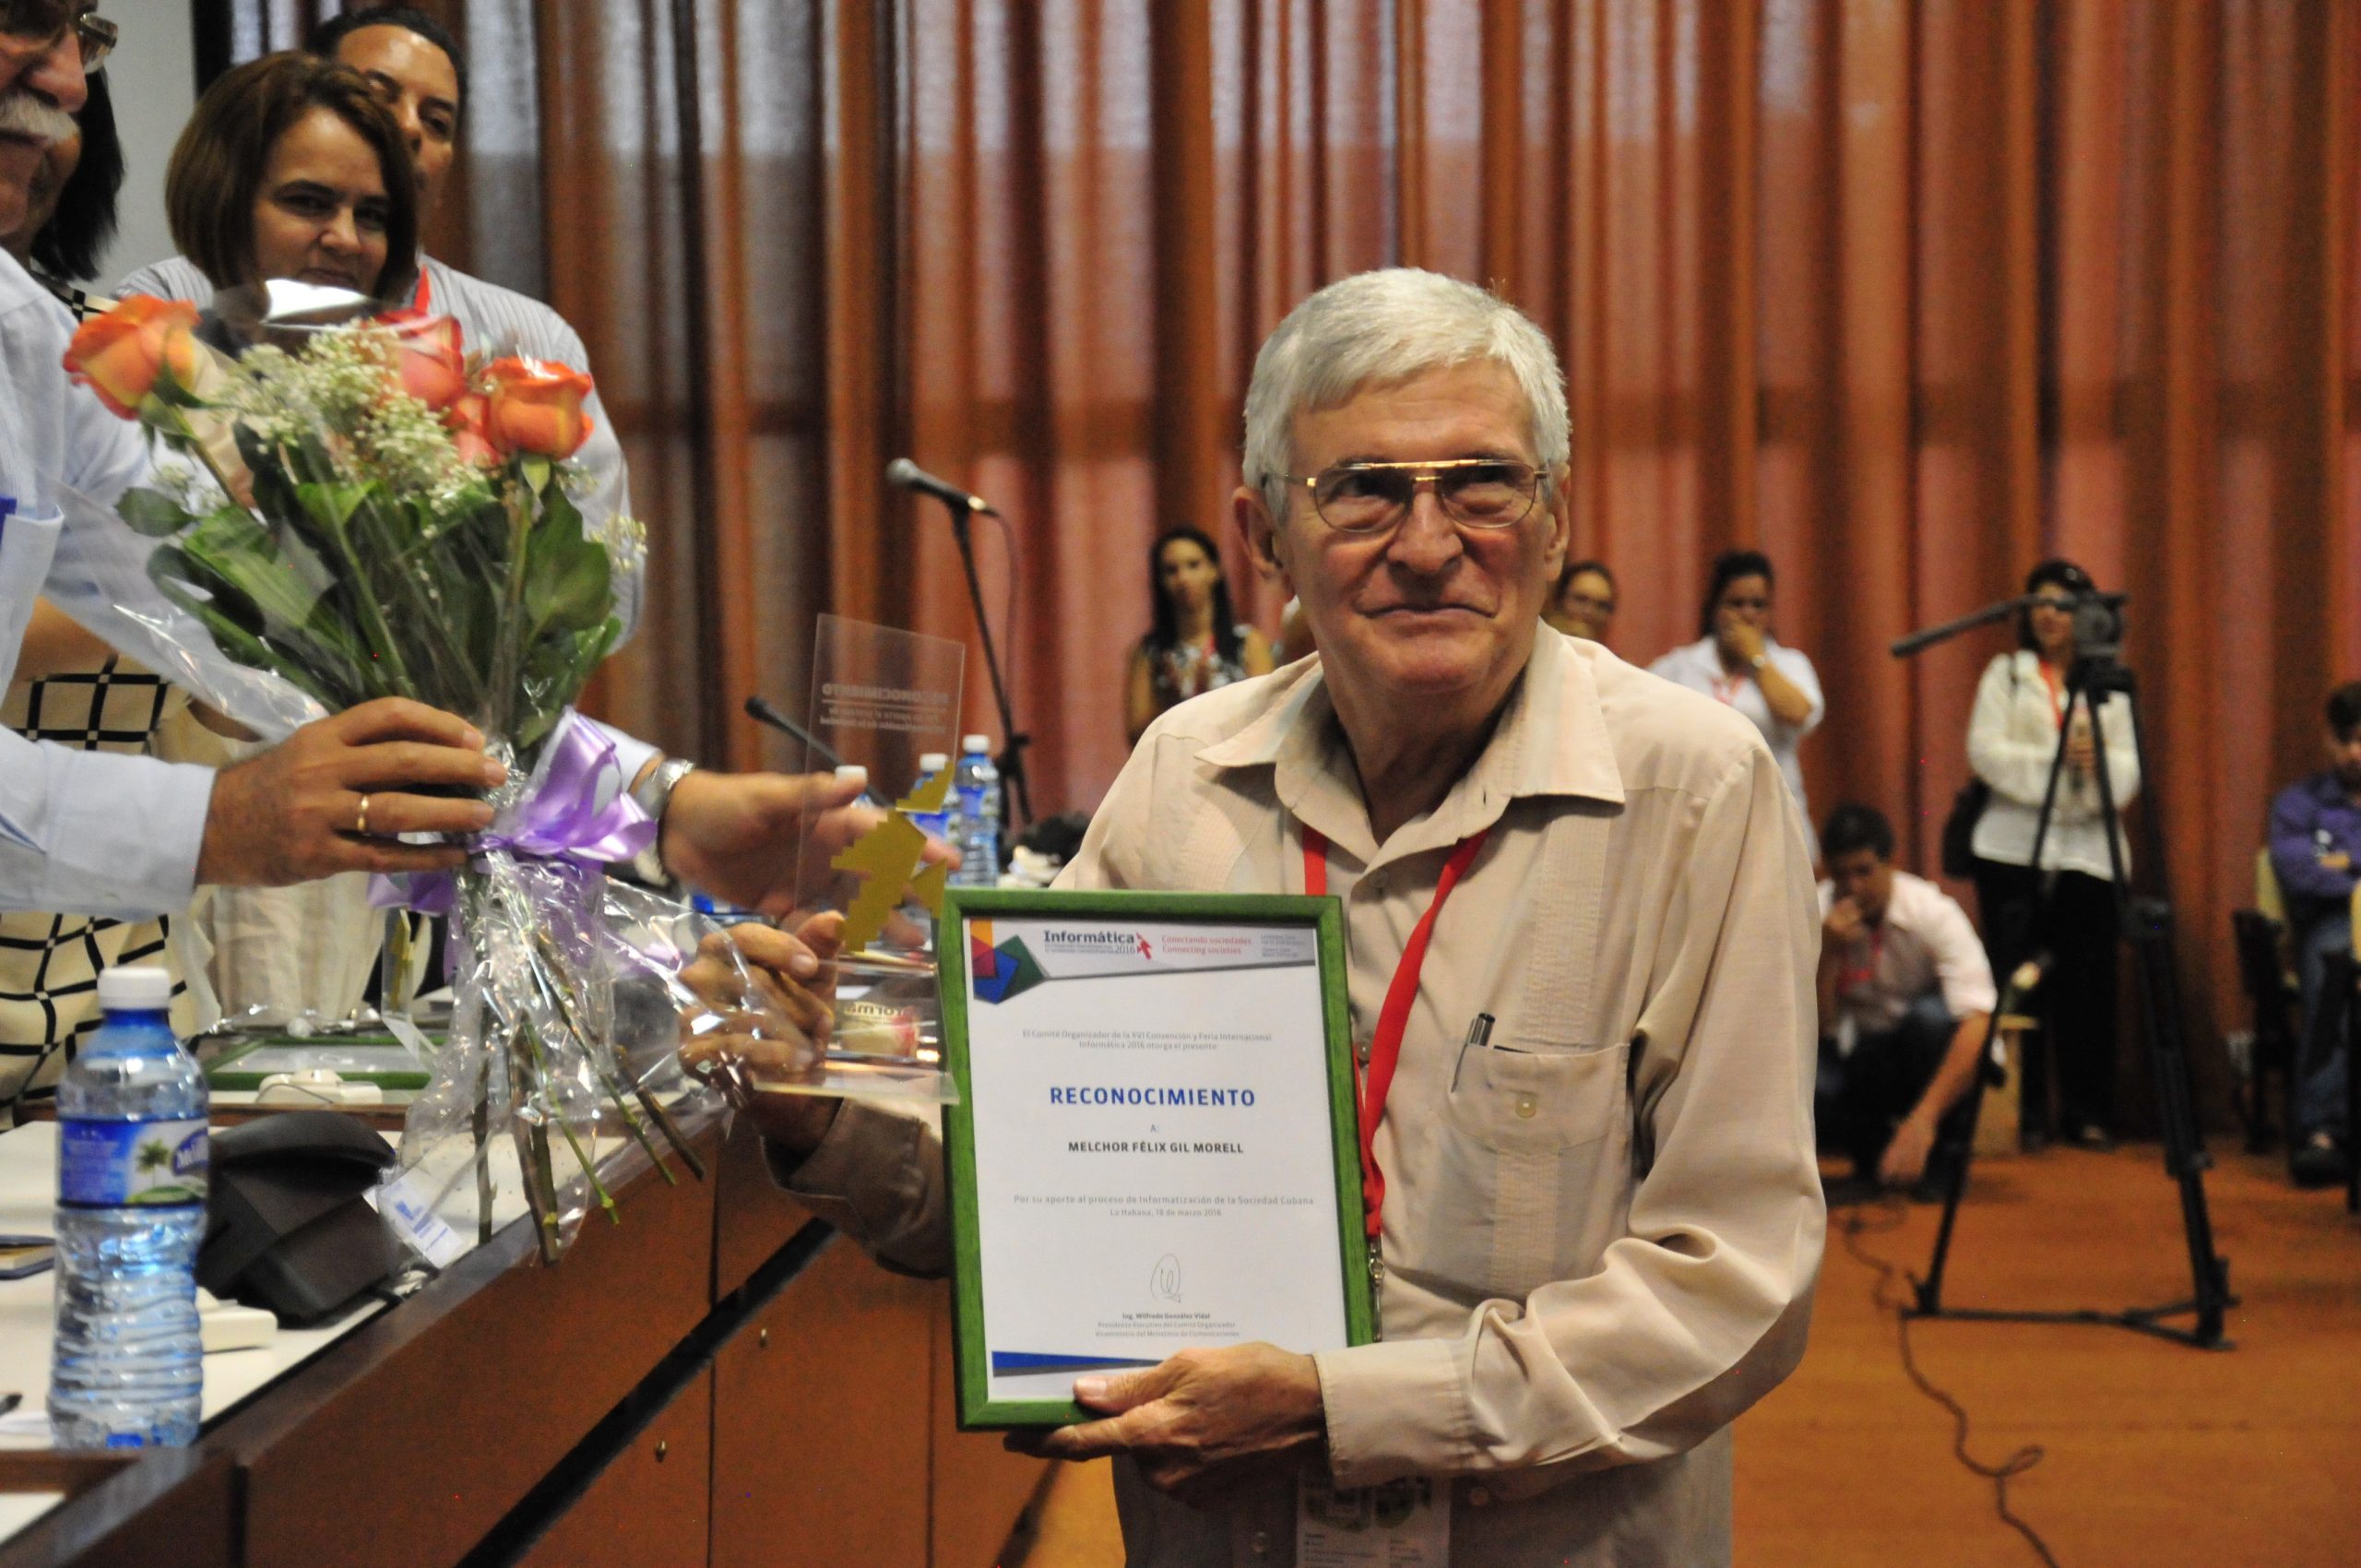 2016 Especial Acknowledgement to Melchor Gil, Founding President of INFORMÁTICA Conventions and Fairs, and Founding Rector of the Cuban University of Computer Science